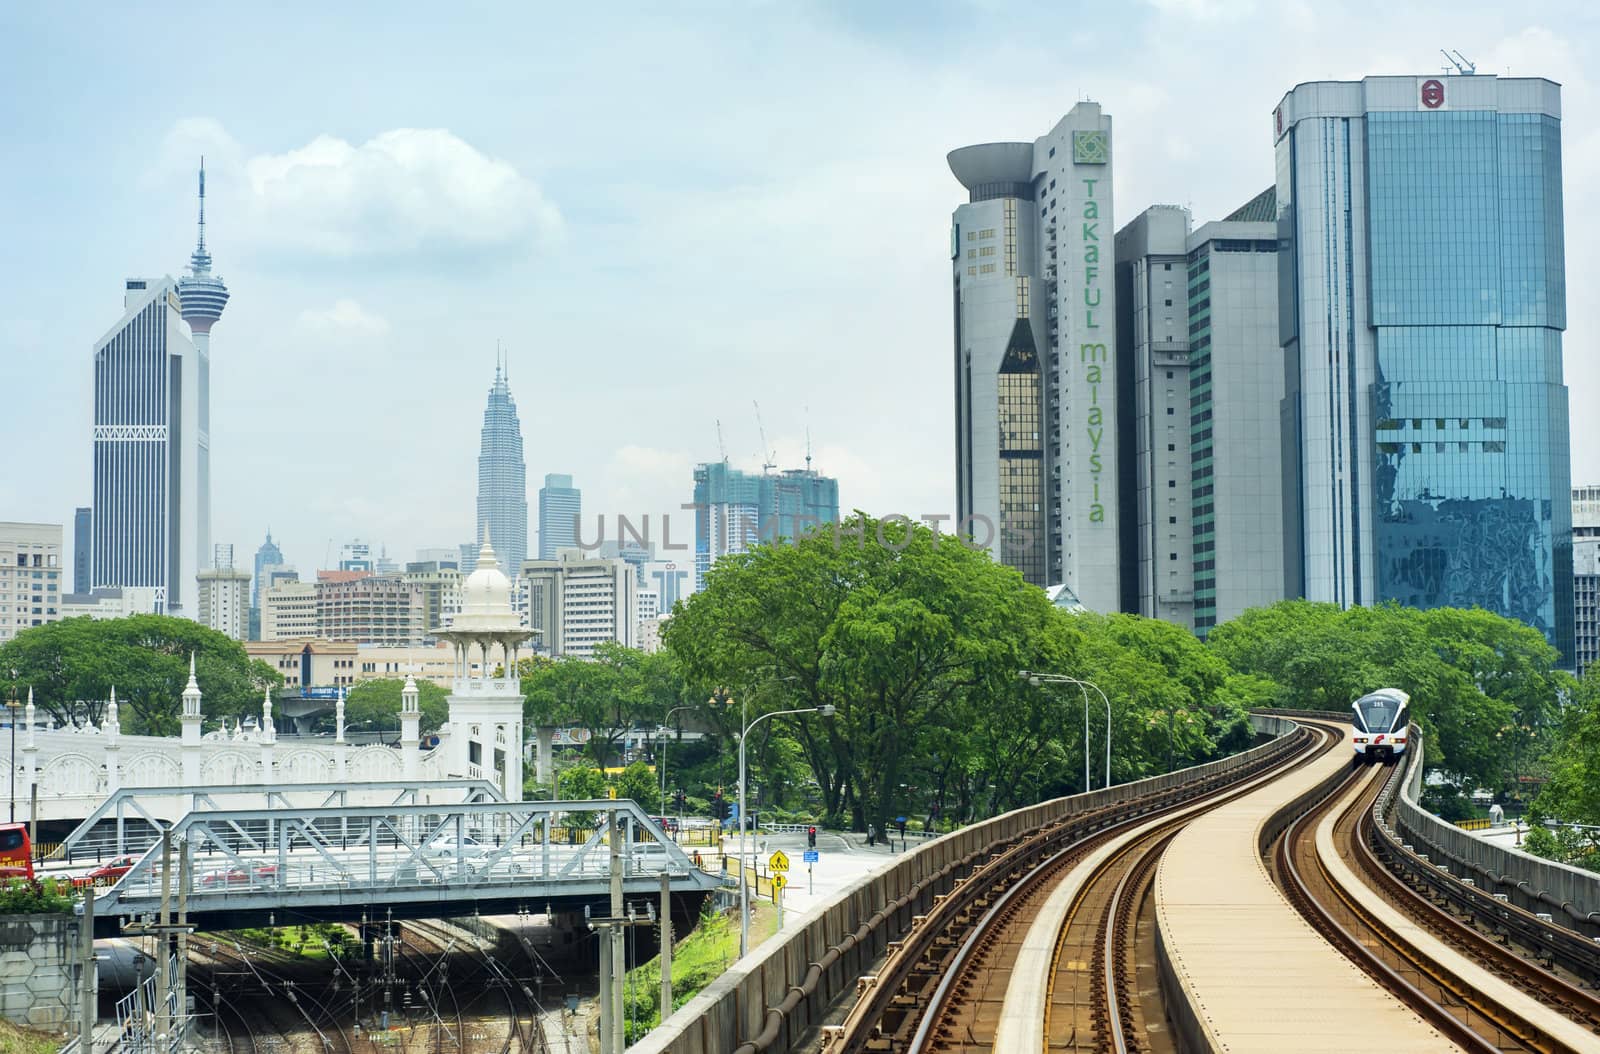 Kuala Lumpur, Malaysia - March 20, 2012: LRT train arrives at a train station in Kuala Lumpur. Kuala Lumpur metro consists of 6 metro lines operated by 4 operators. 